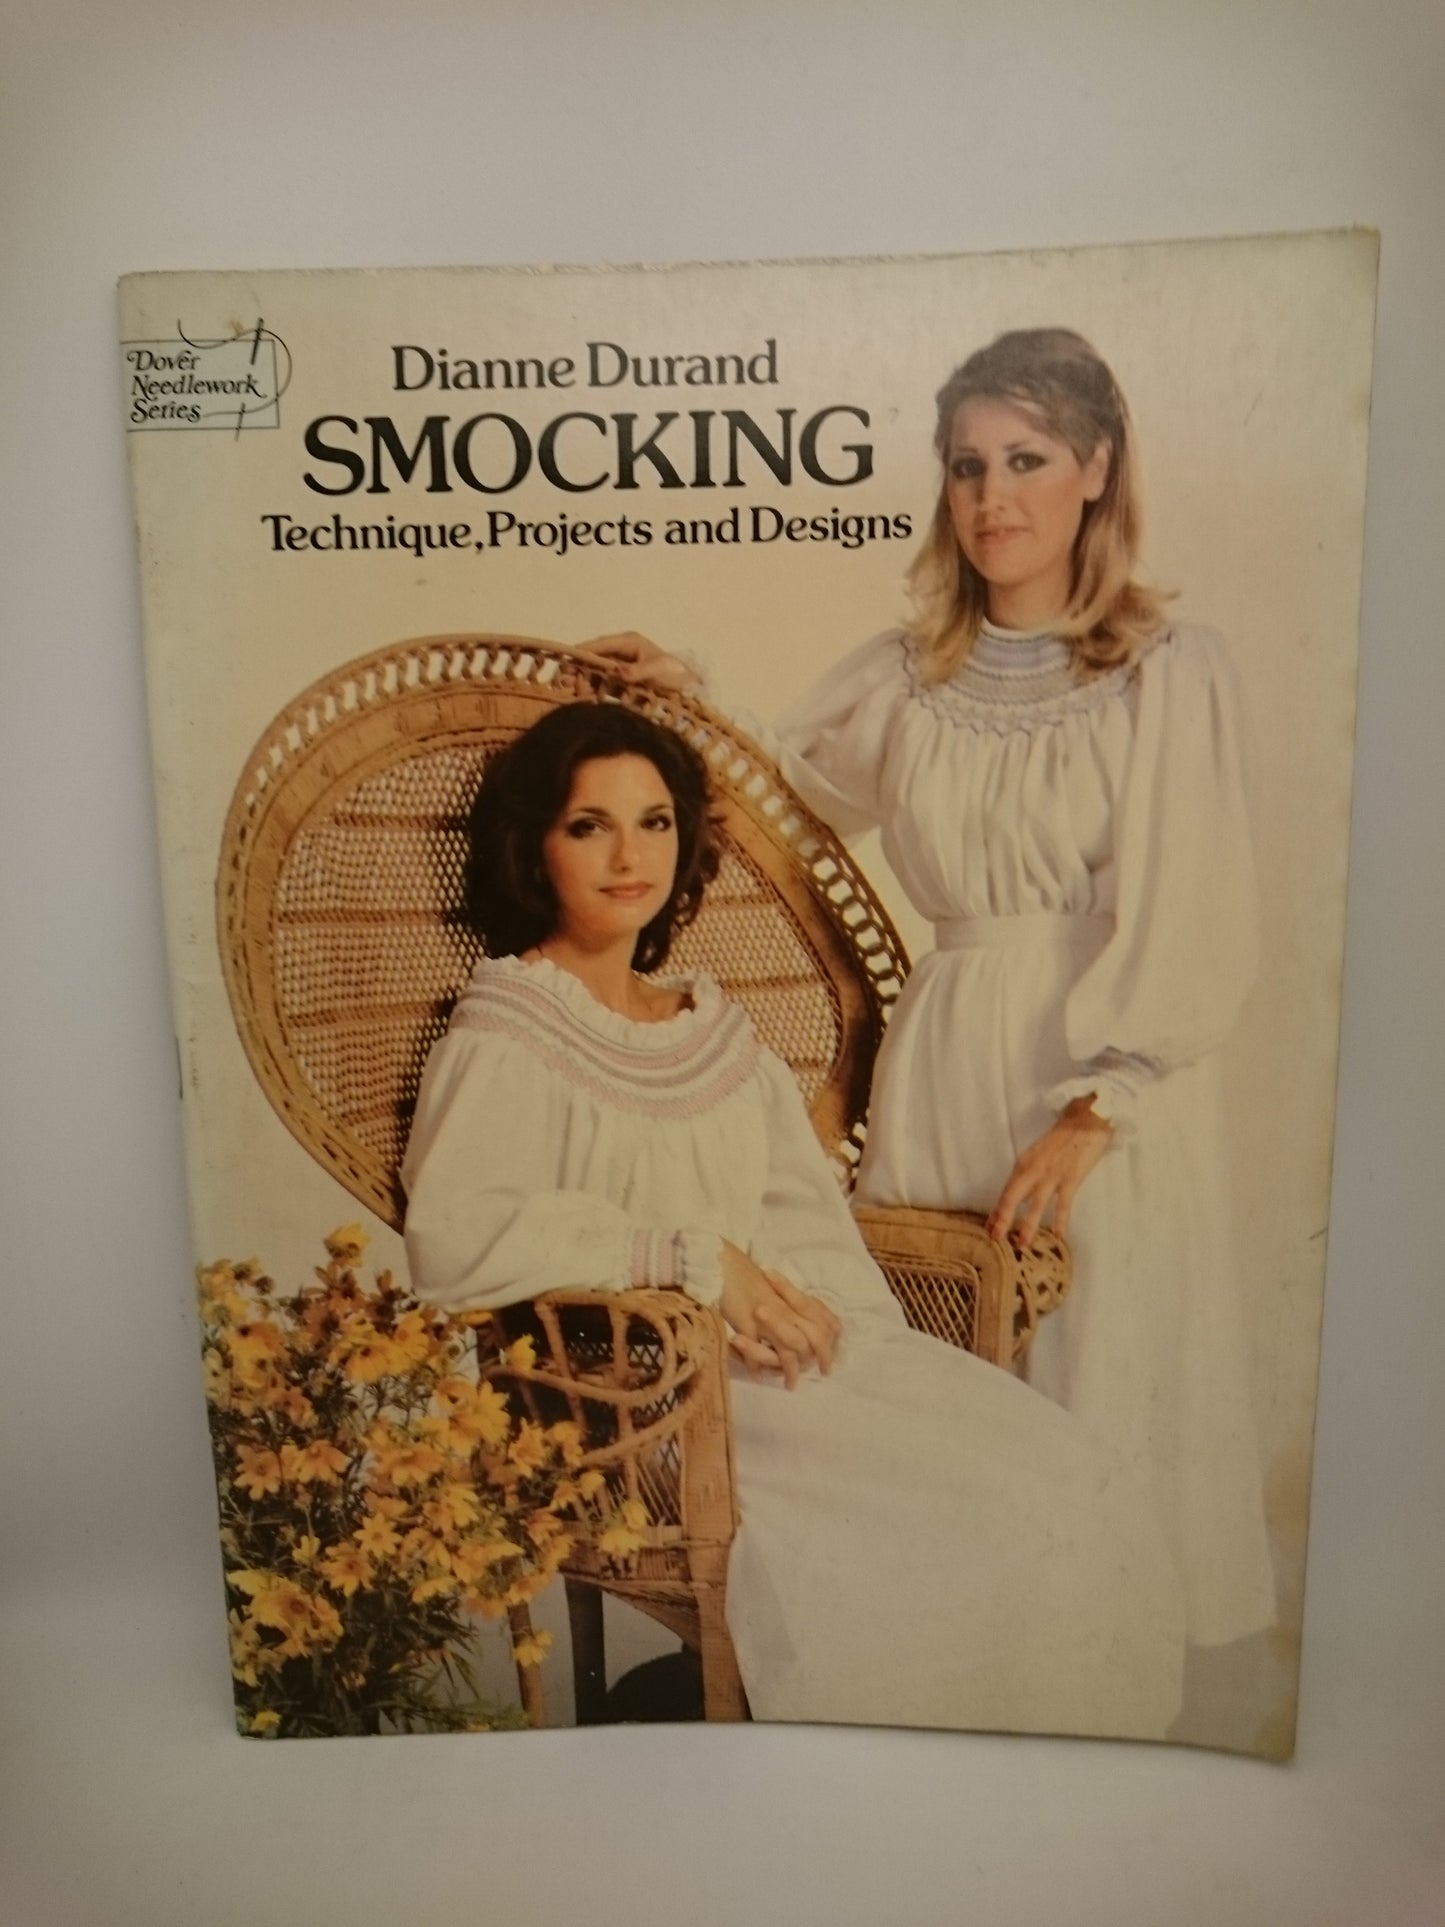 Smocking Technique, Projects and Designs